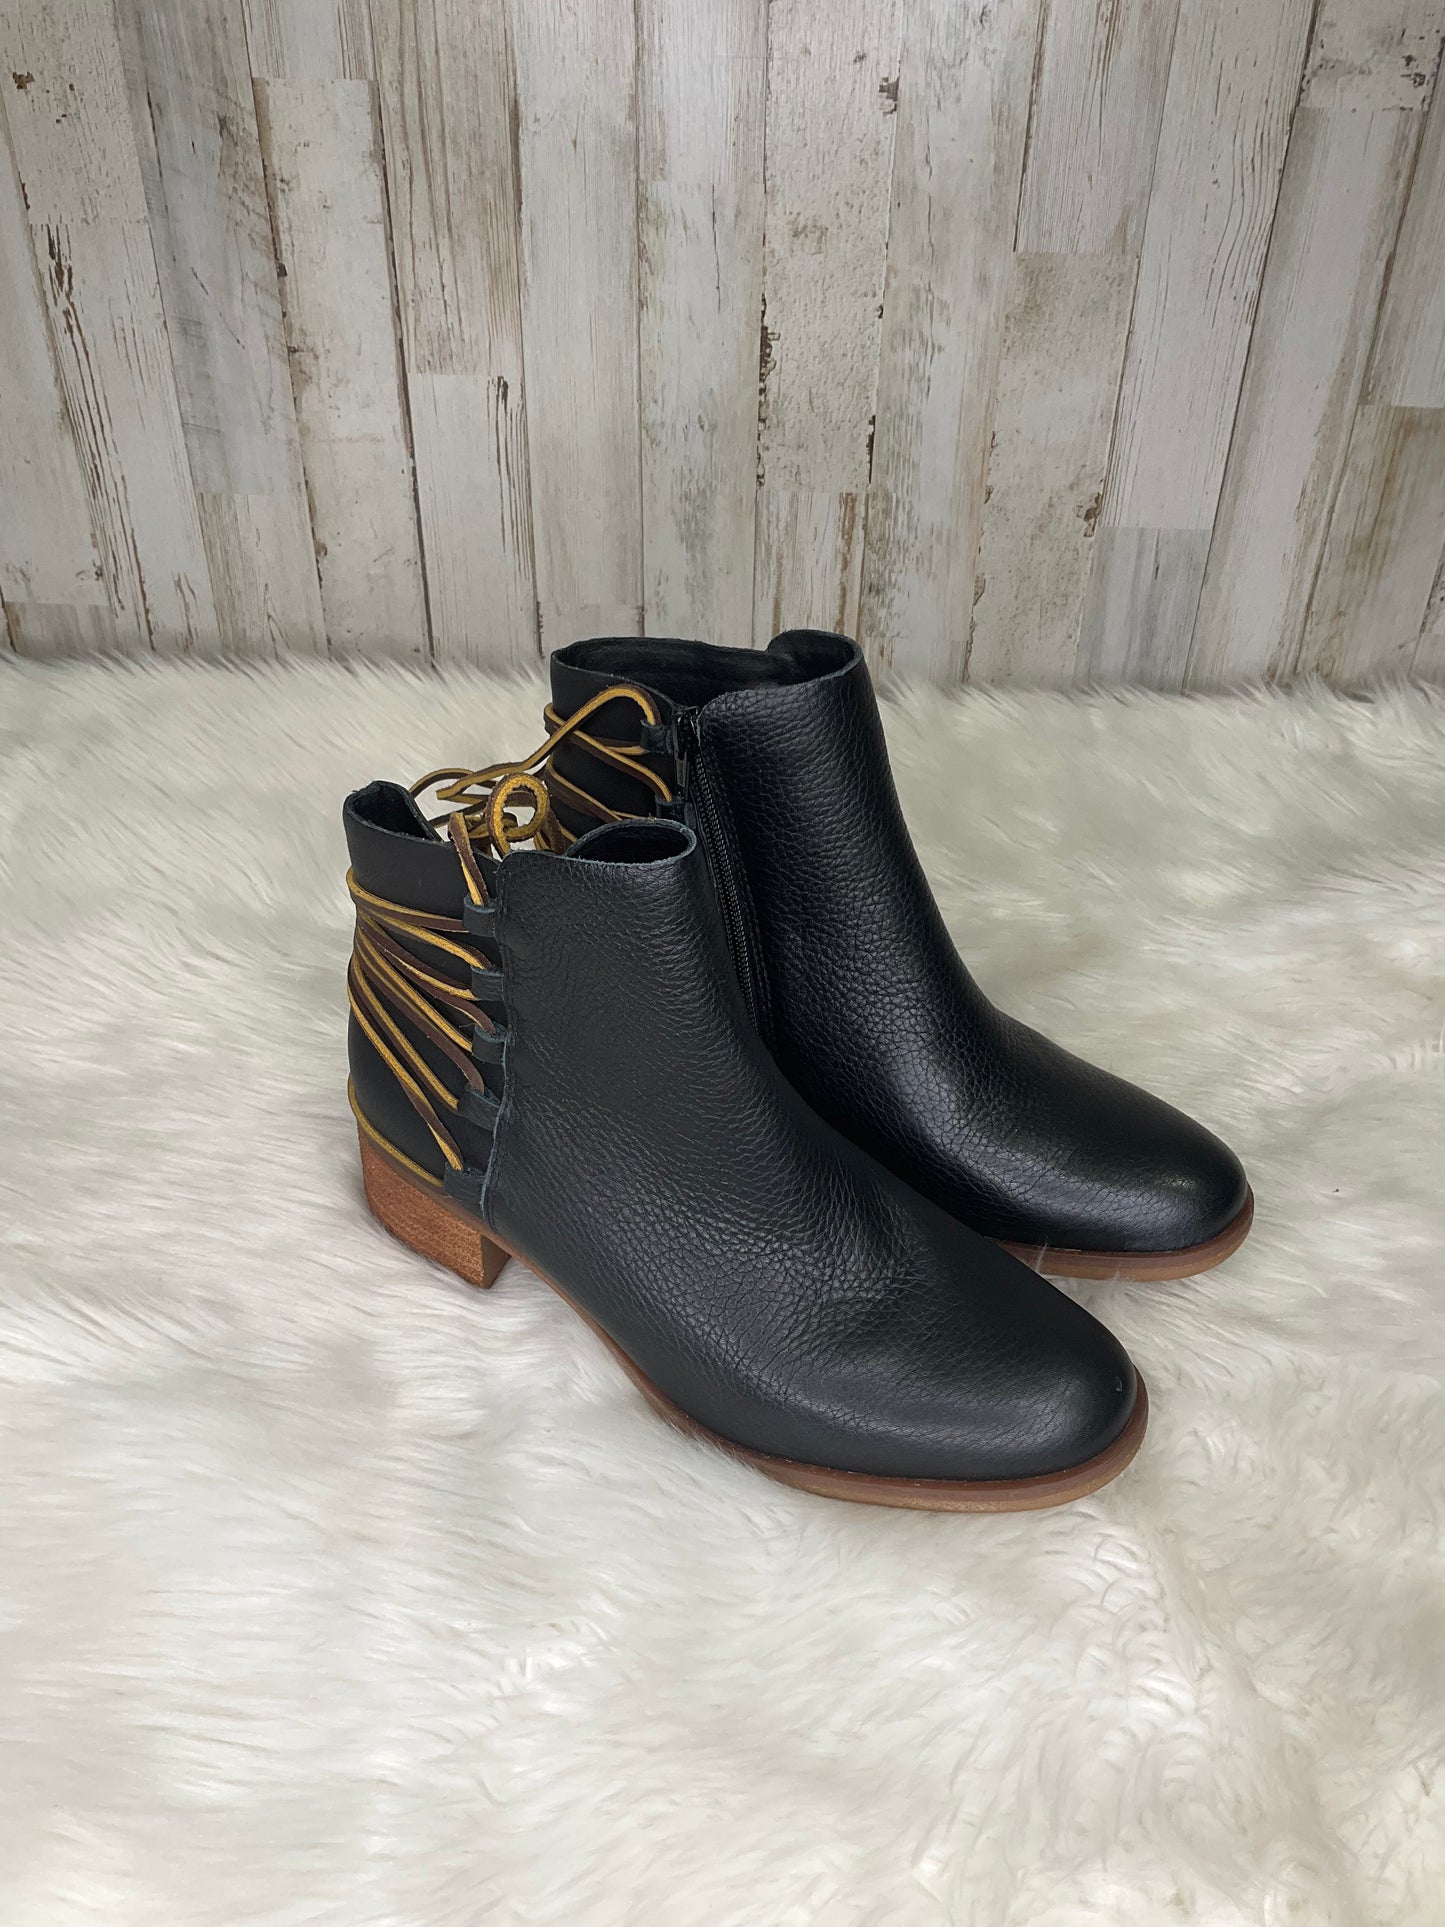 Boots Ankle Heels By Korks  Size: 7.5